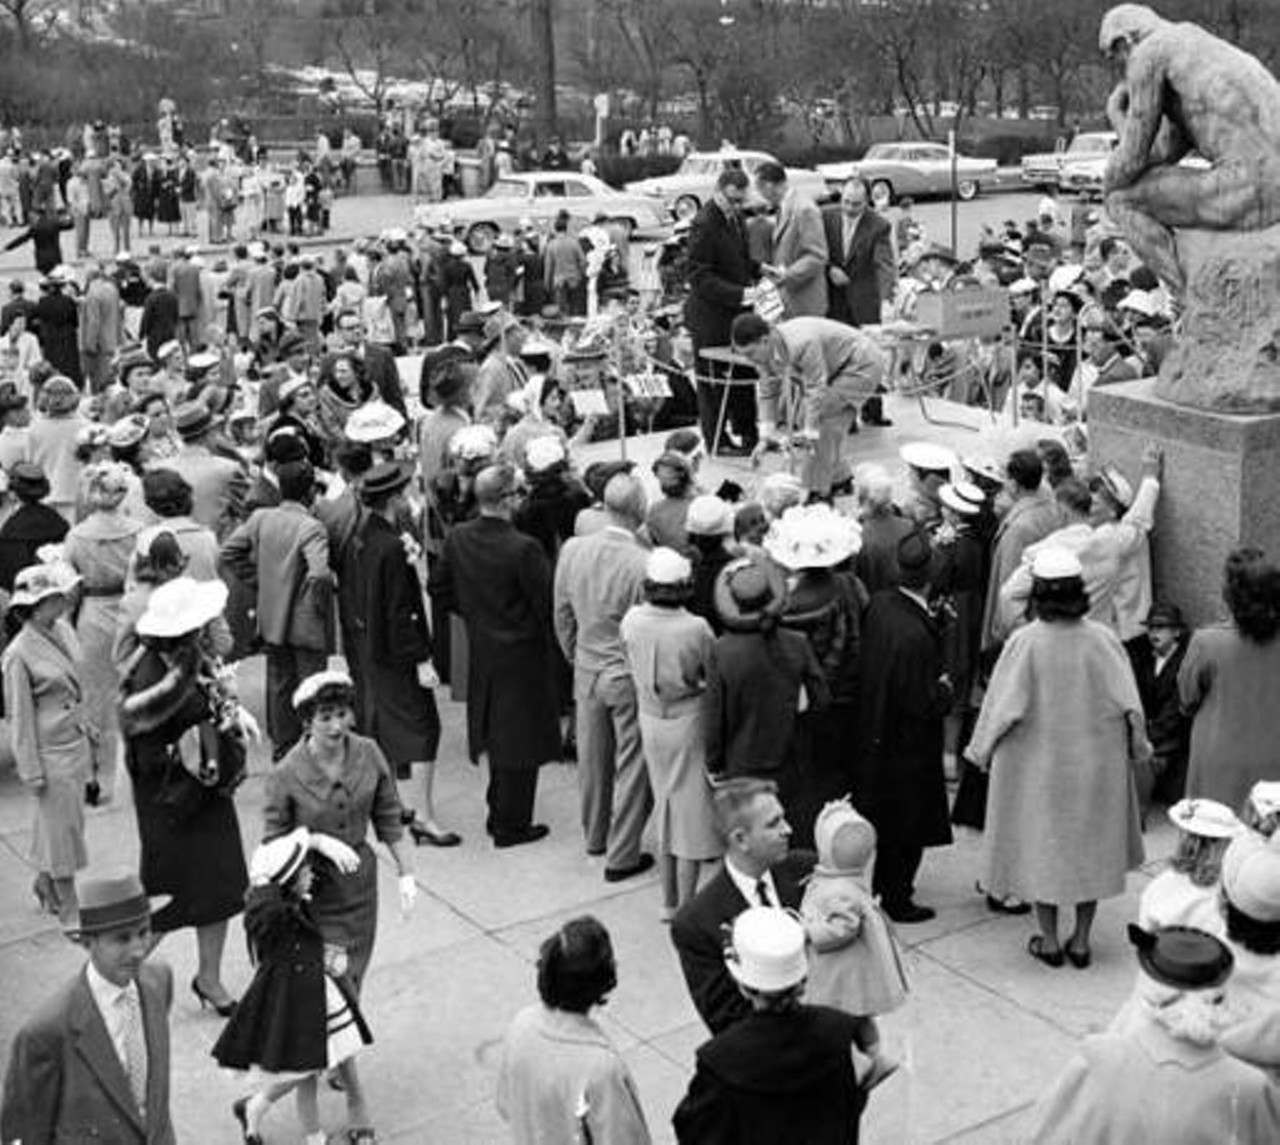 Easter parade spectators outside of the Cleveland Museum of Art, 1958.